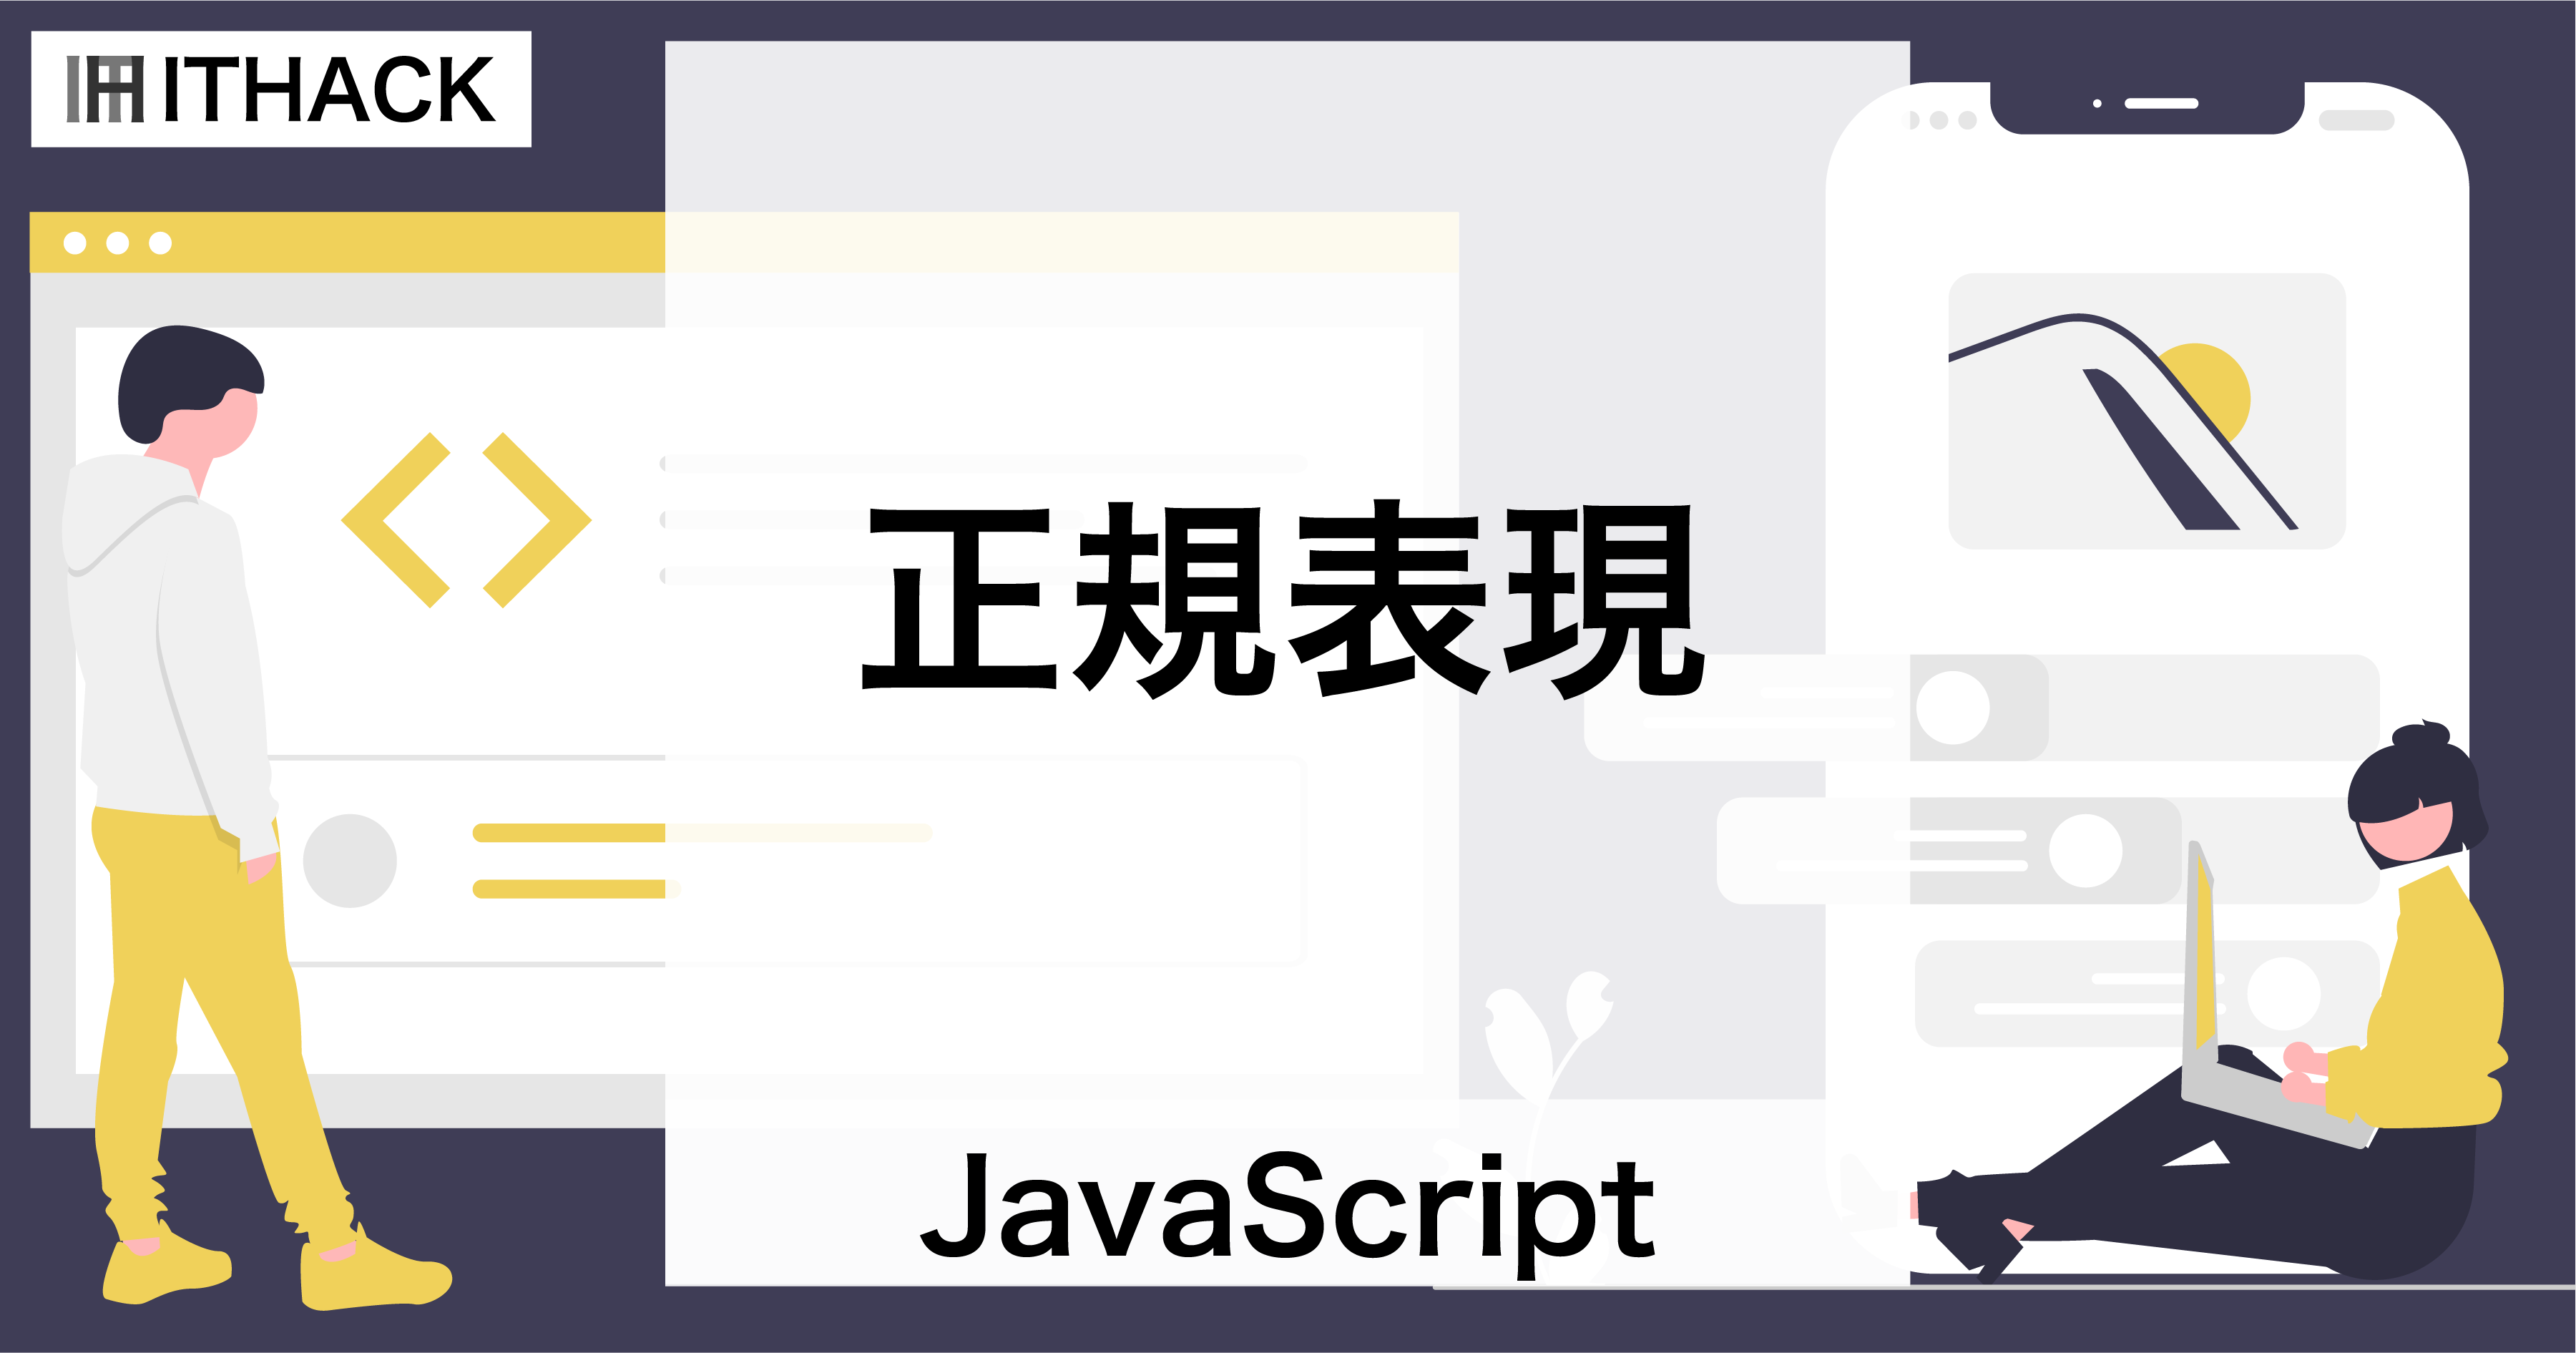 【JavaScript】正規表現 - 文字列のパターン表現と検索